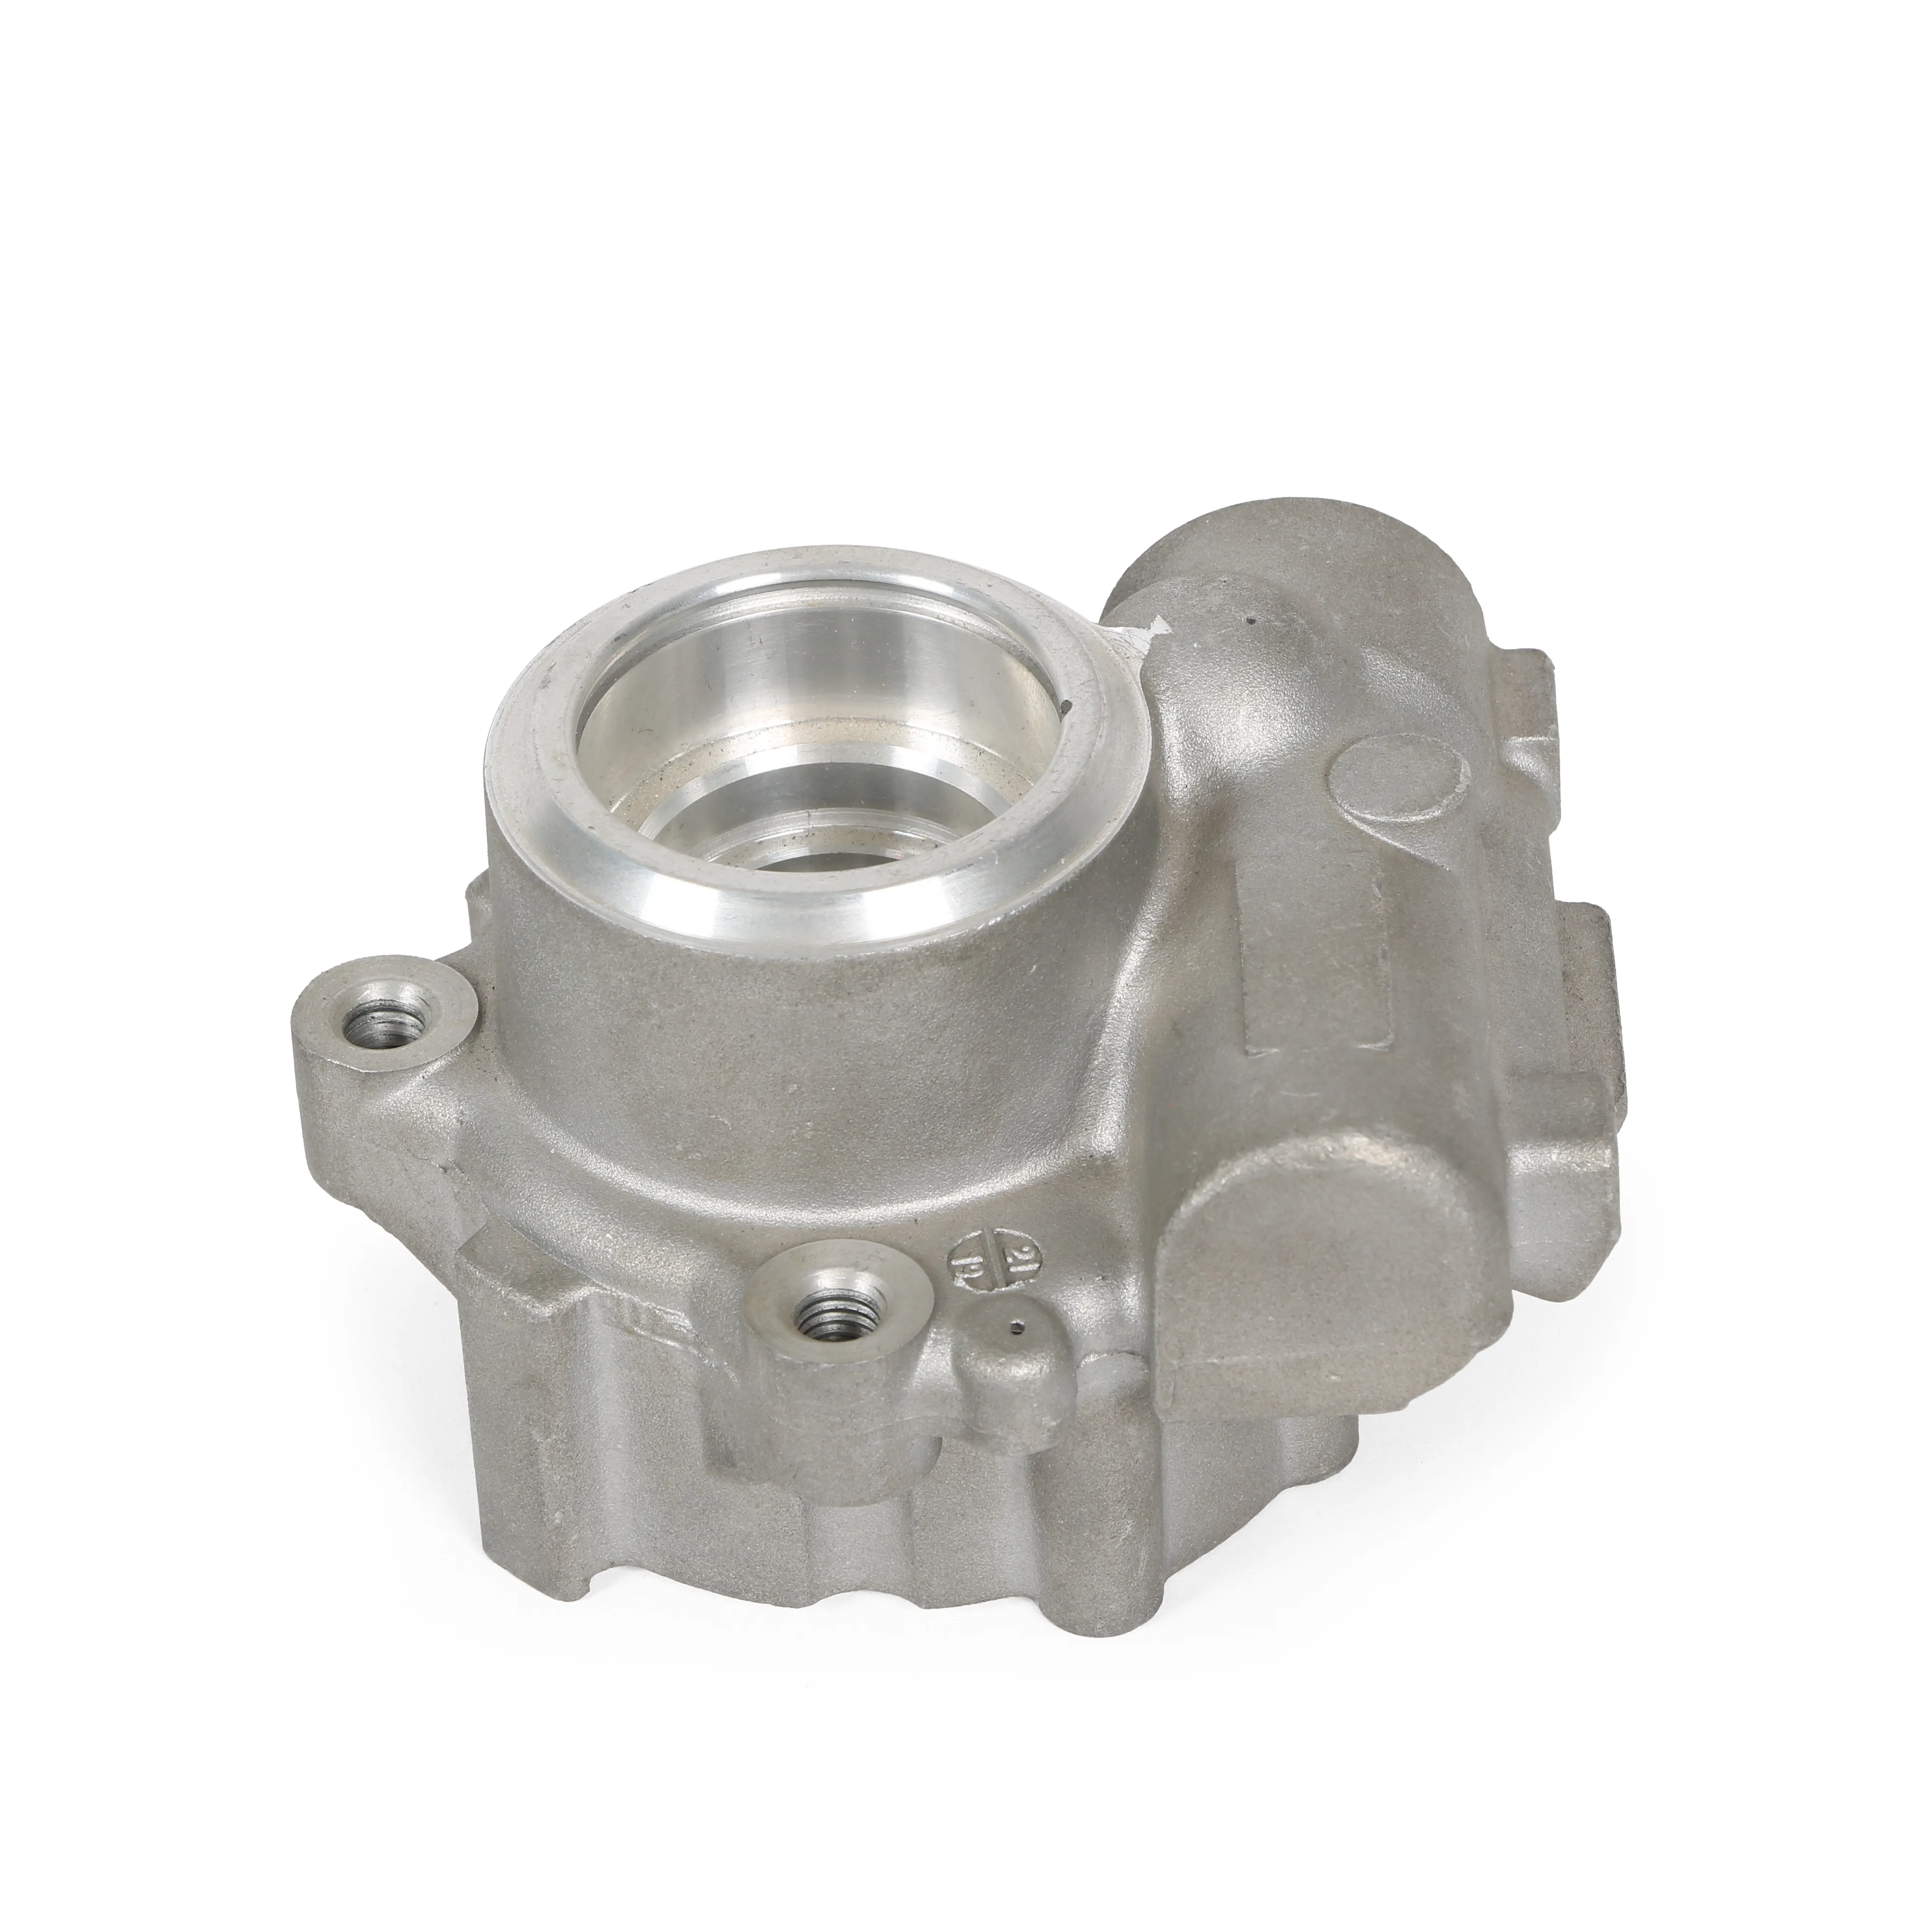 Precise Aluminum Die Cast Steering Shaft Component Processed By CNC Machining For Automobile